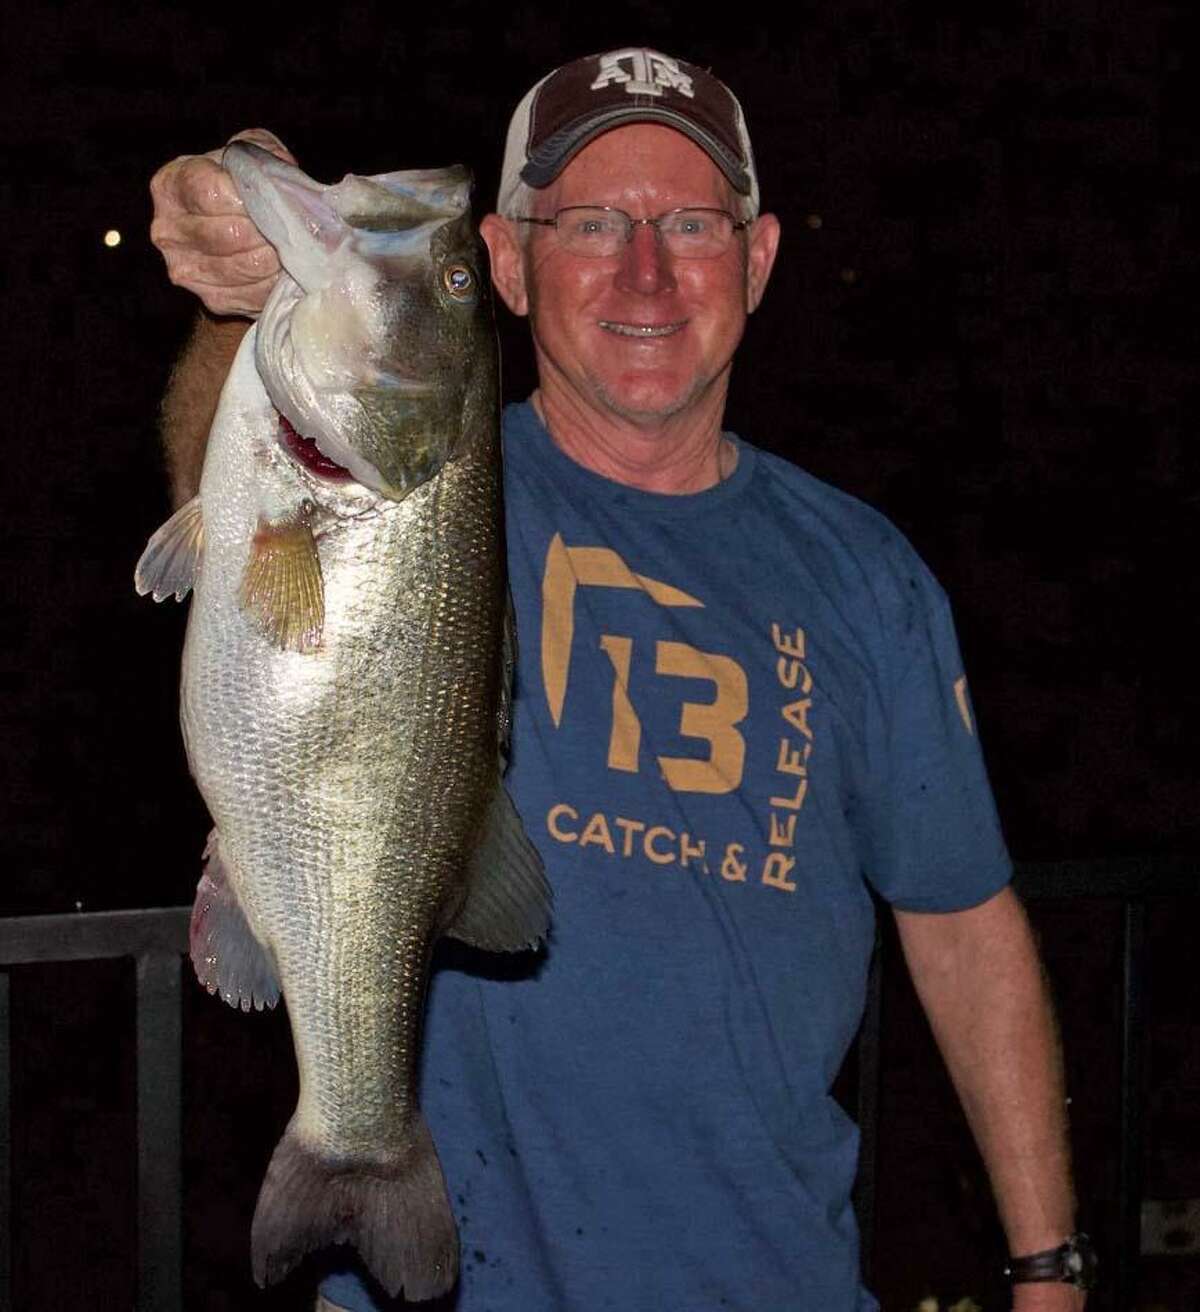 David Perciful came in third in the CONROEBASS Thursday Big Bass Tournament with a bass weighing 7.24 pounds.